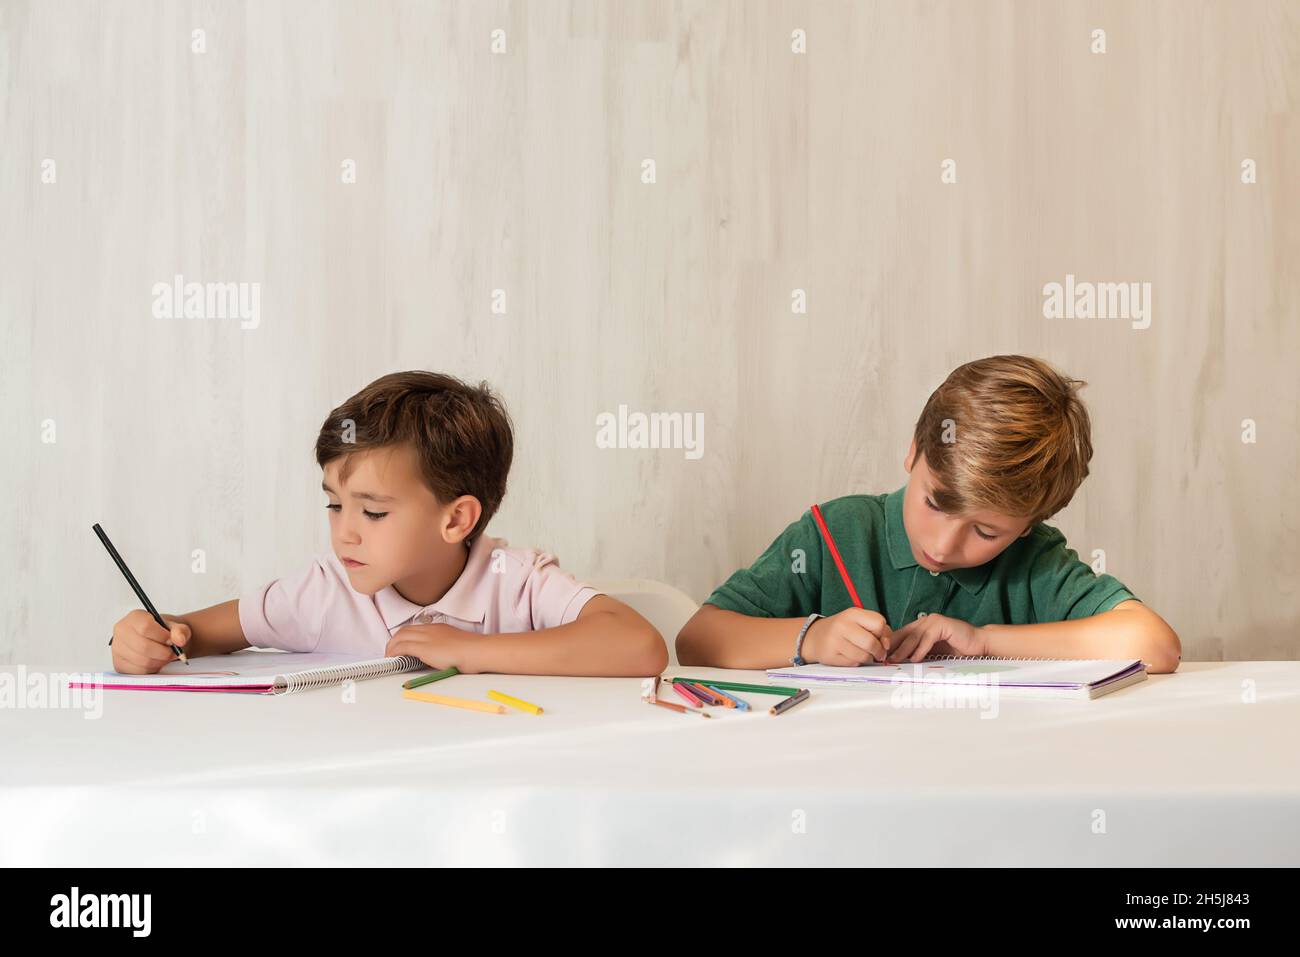 Two children doing homework at school, drawing with crayons Stock Photo